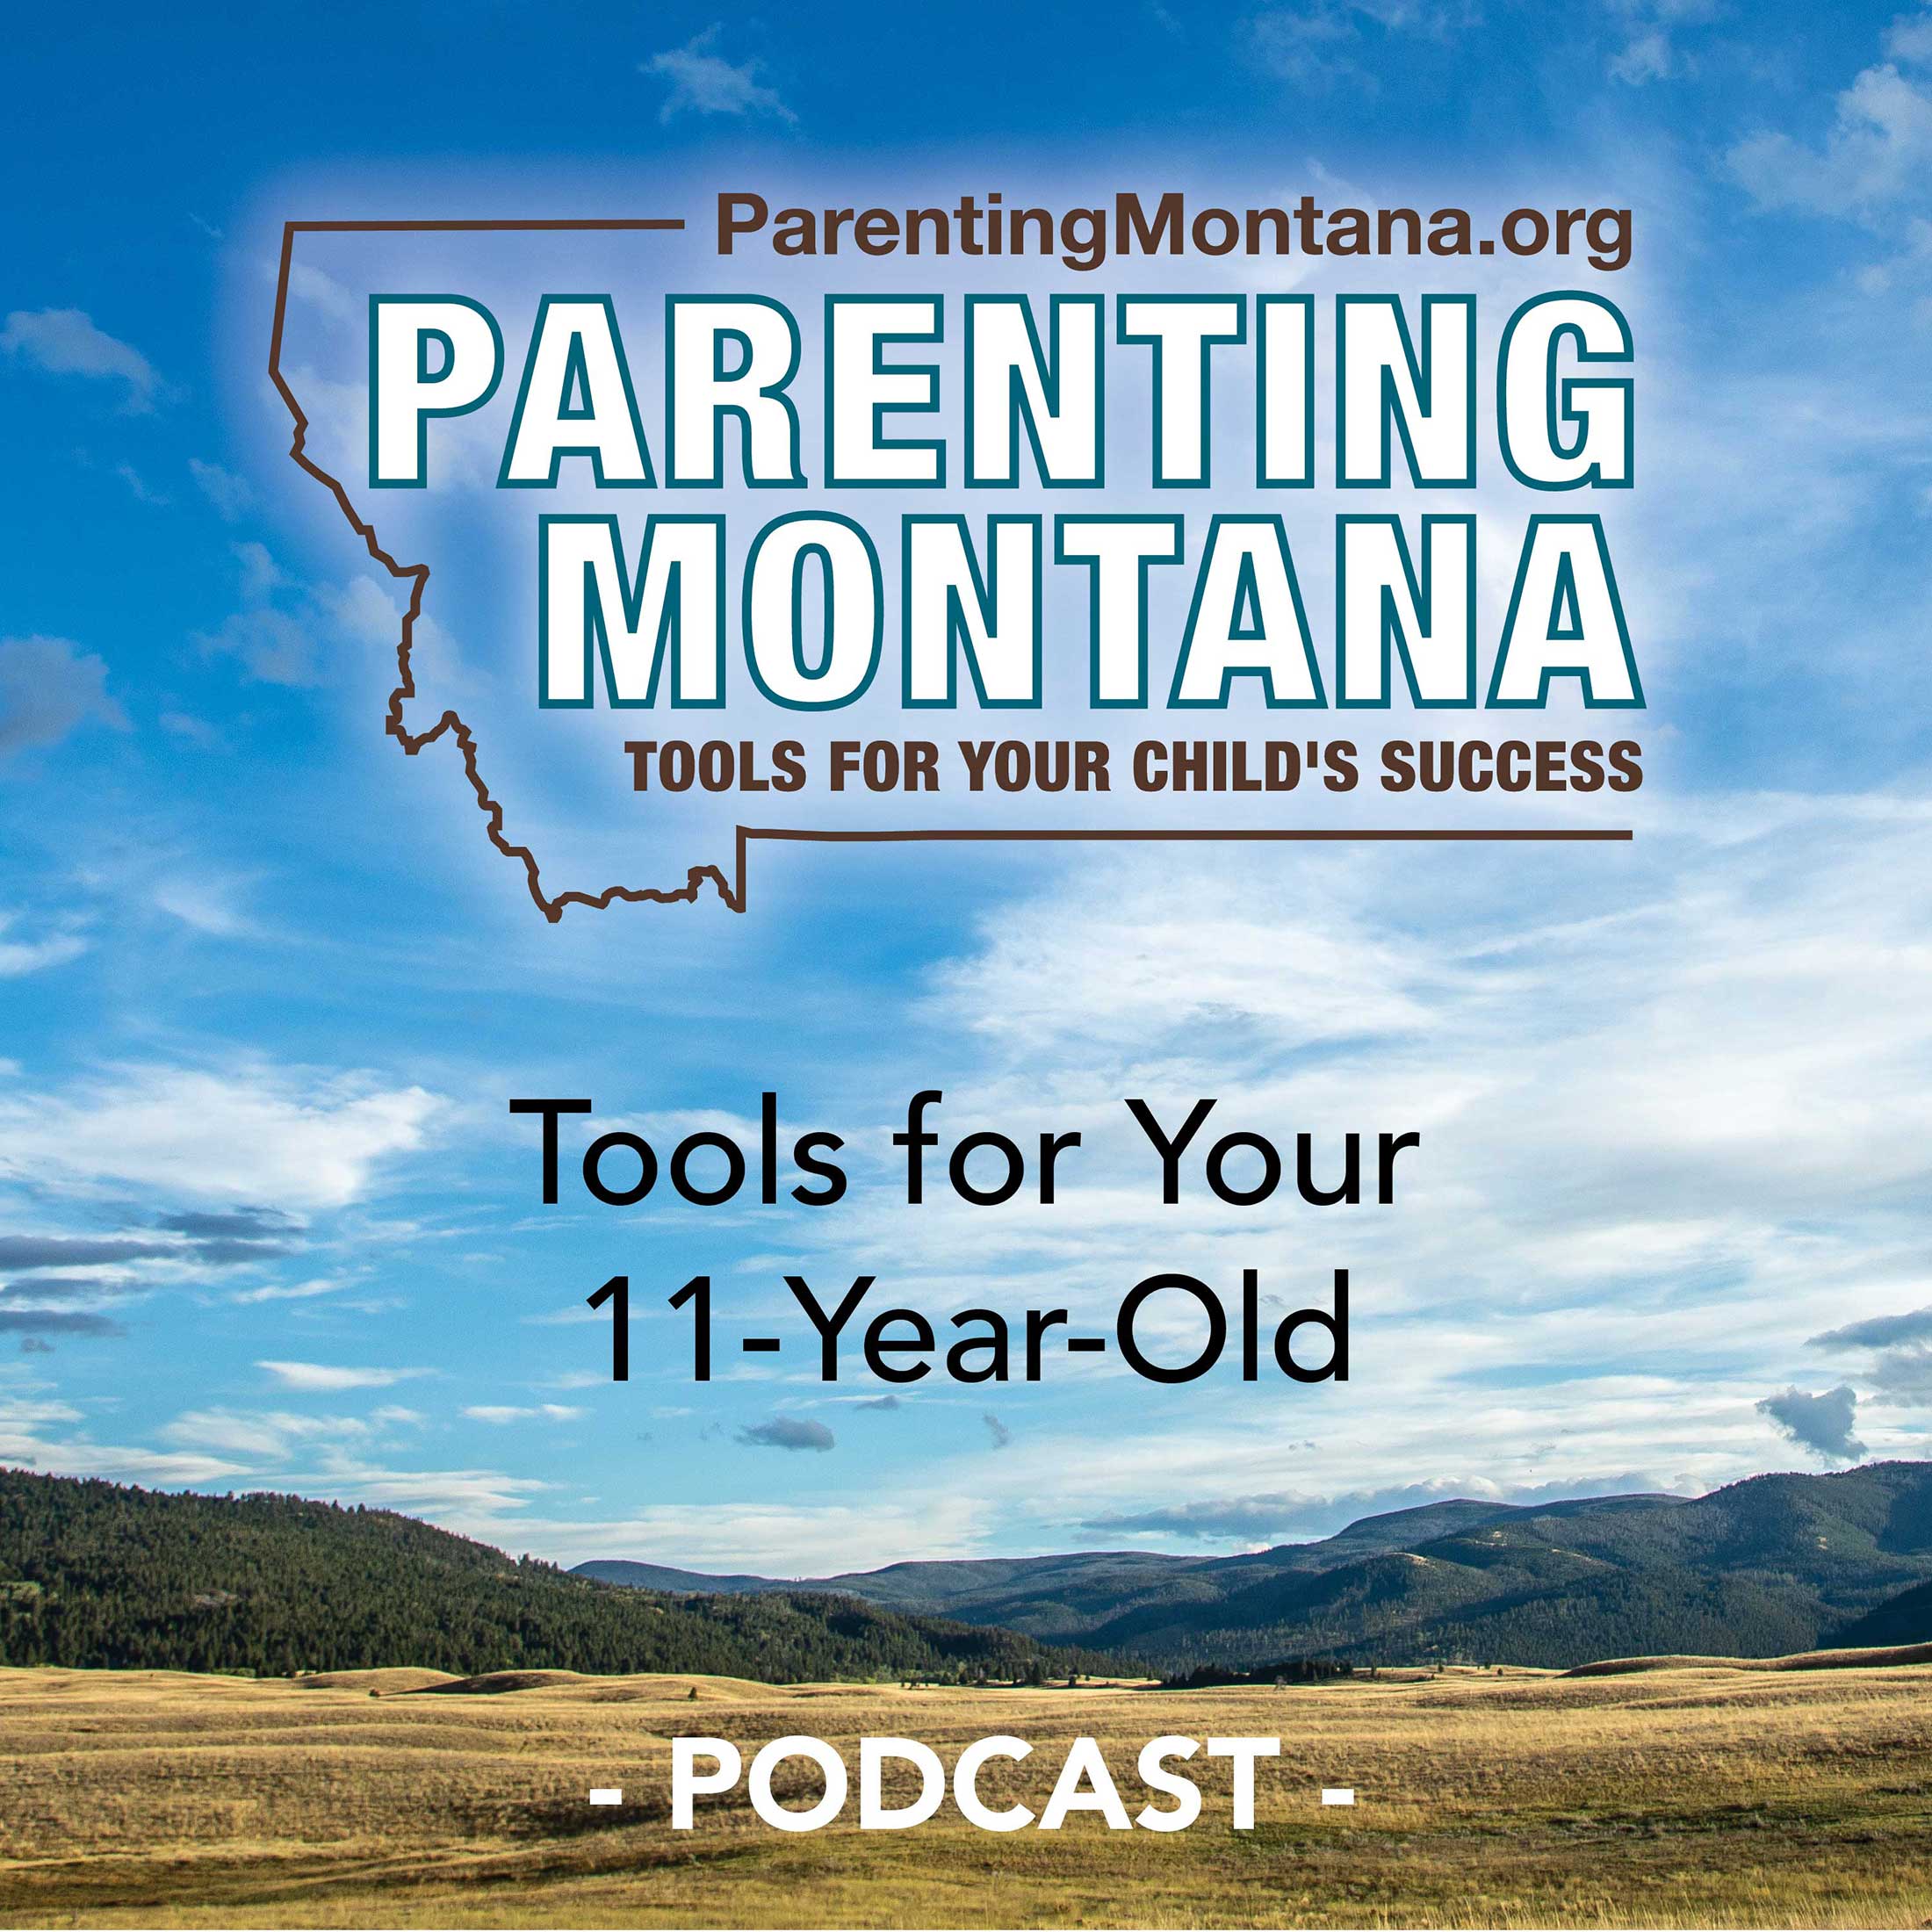 Artwork for podcast 11-Year-Old Parenting Montana Tools